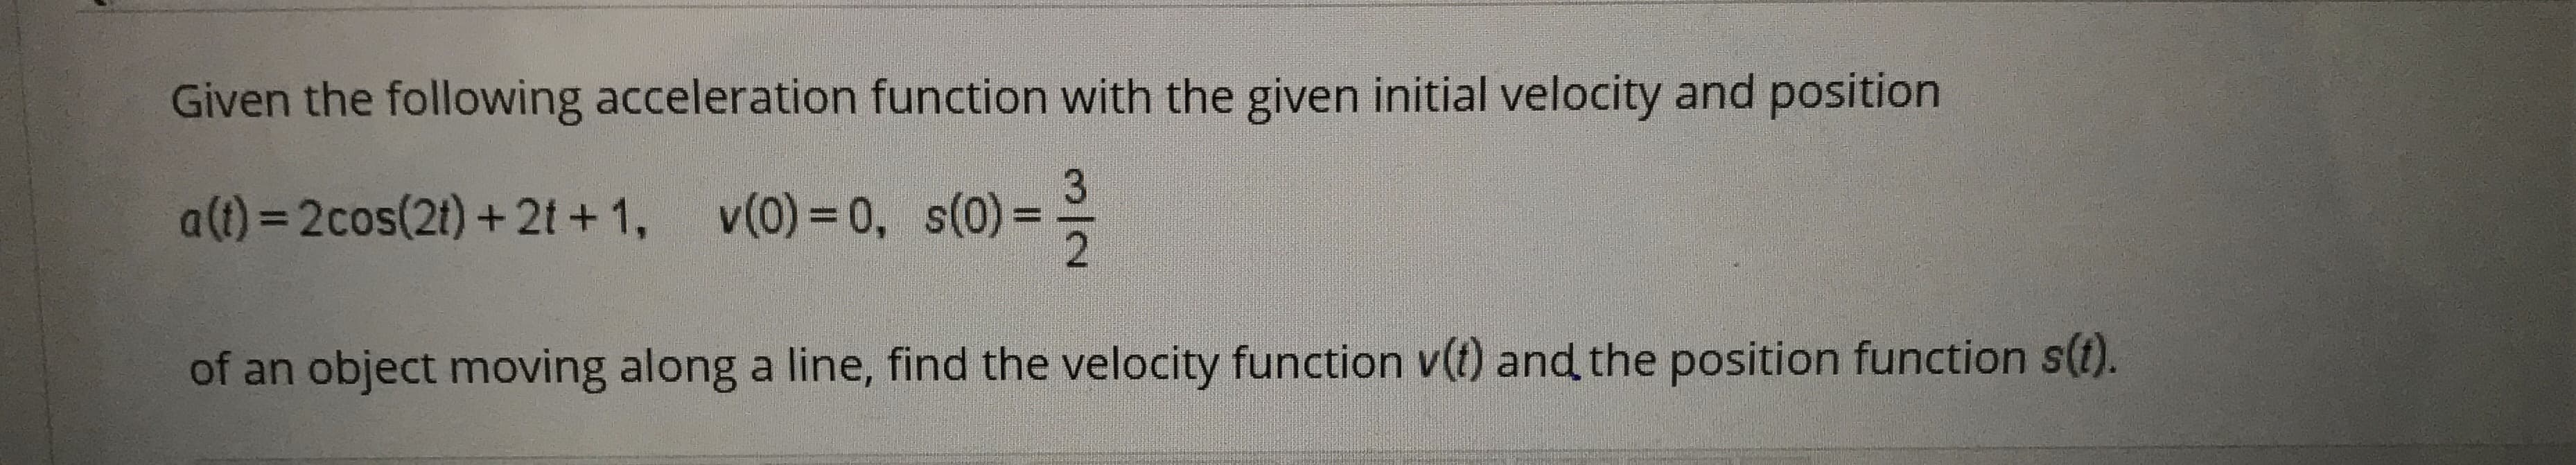 Given the following acceleration function with the given initial velocity and position
a(1)=2cos(2t) +2t +1, v(0)= 0, s(0)=
of an object moving along a line, find the velocity function v(t) and the position function s(t).
